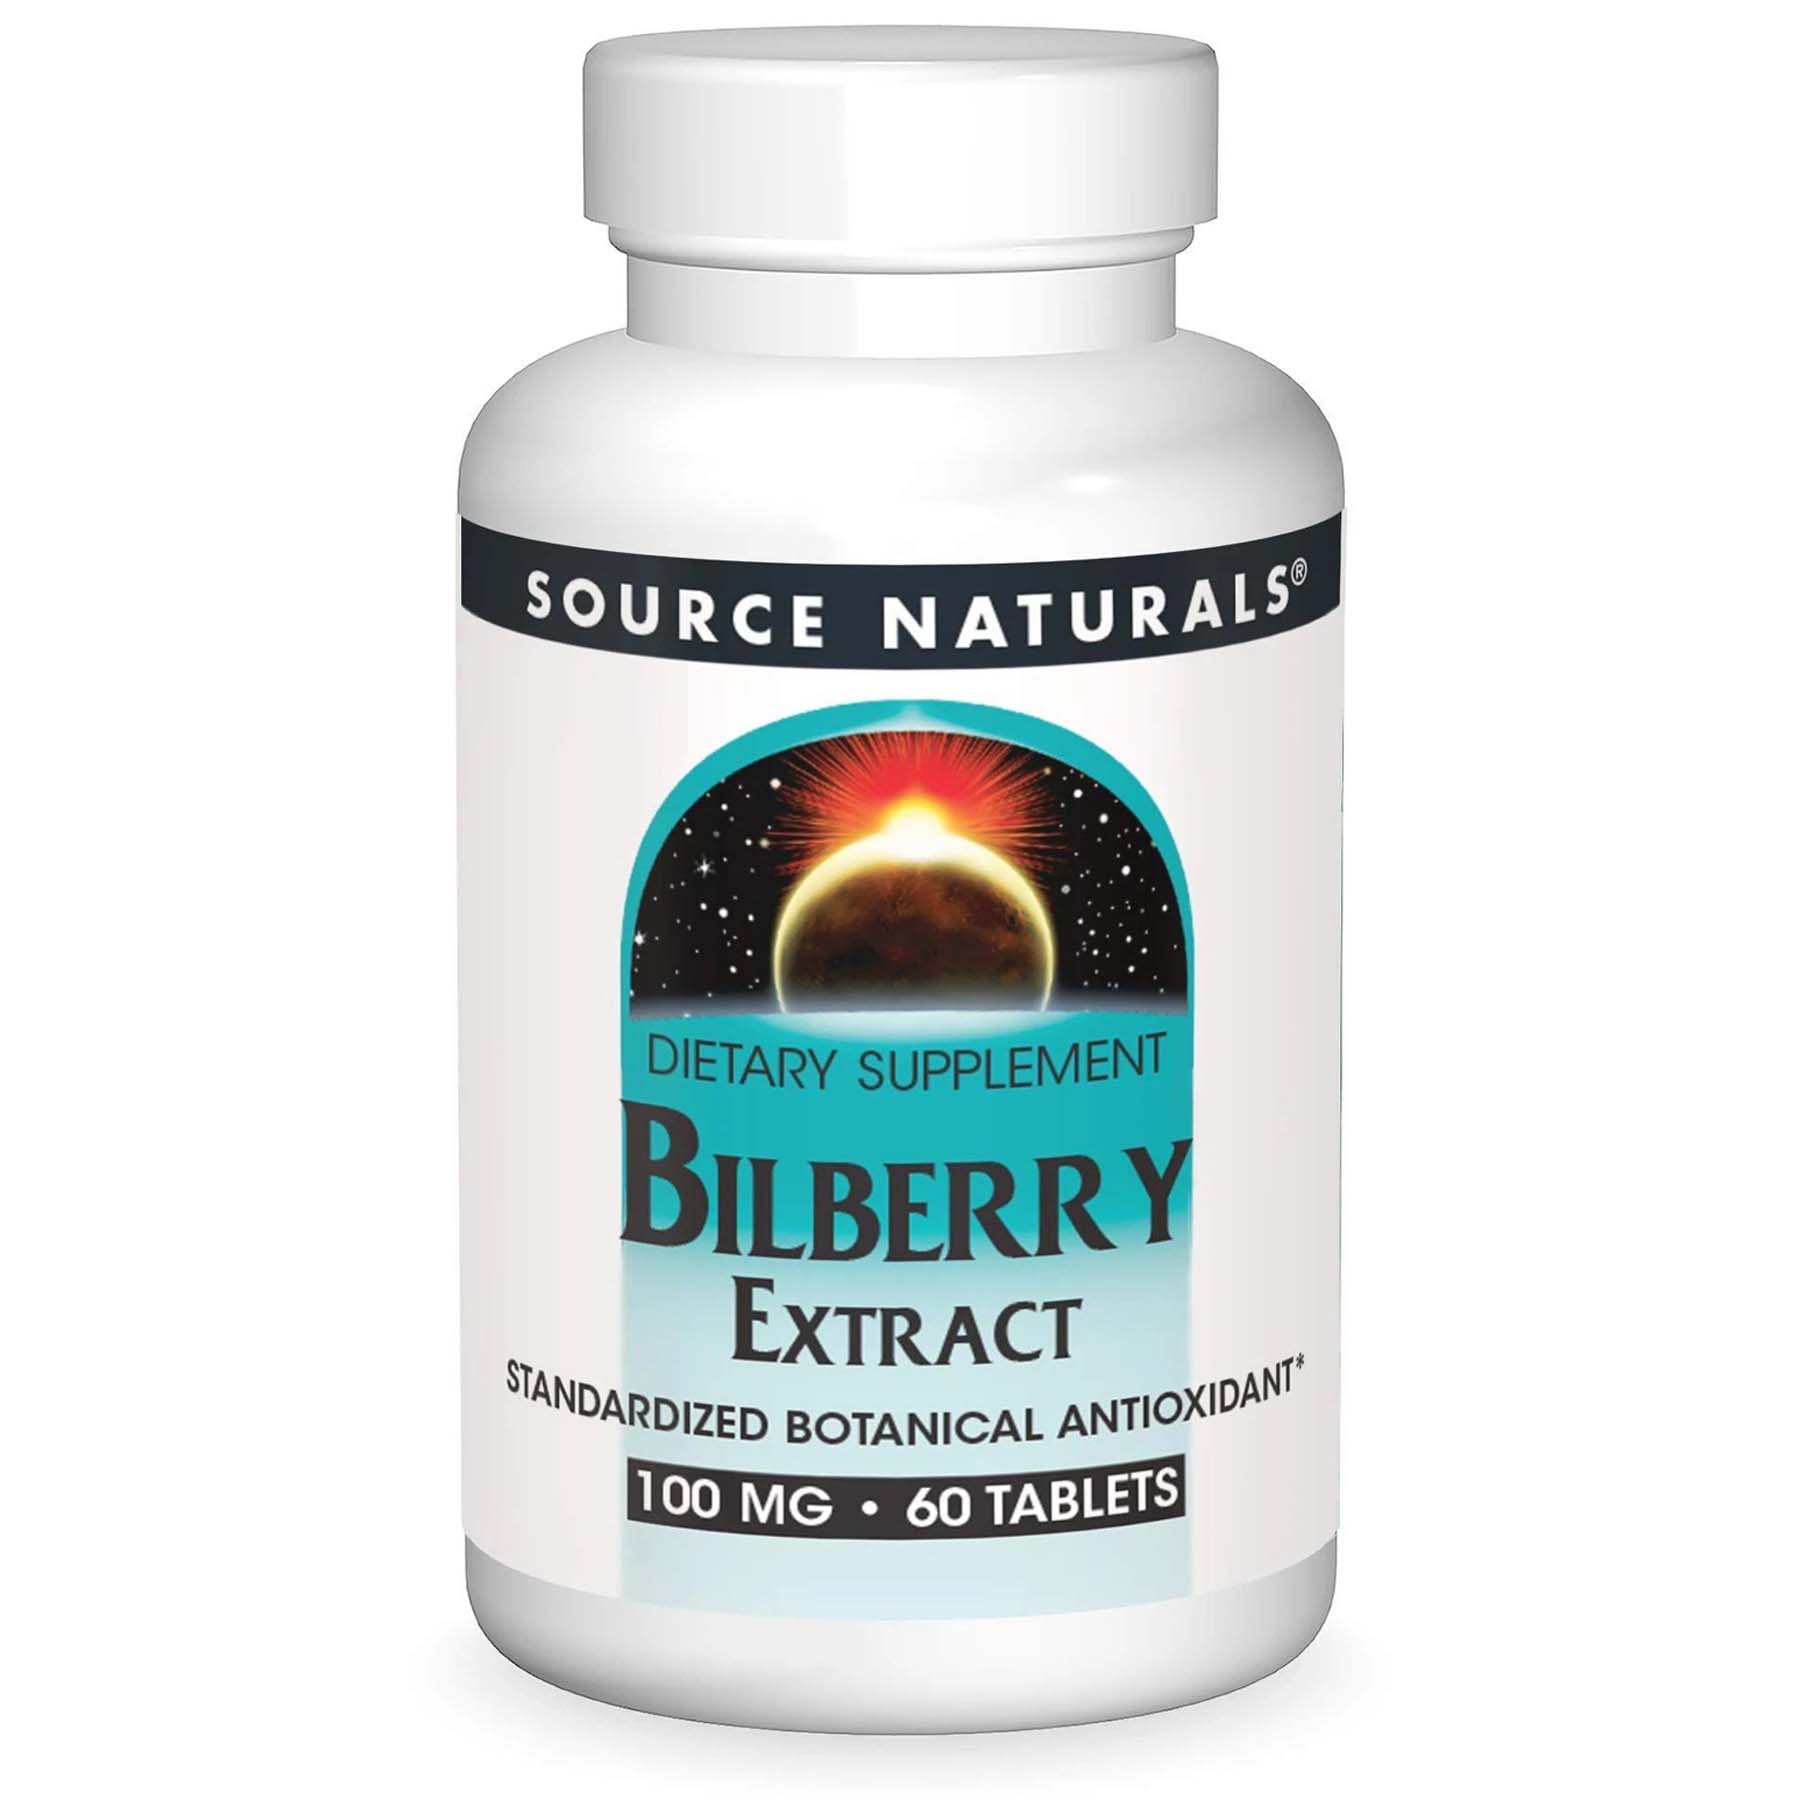 Source Naturals Bilberry Extract, 100 mg, 60 Tablets